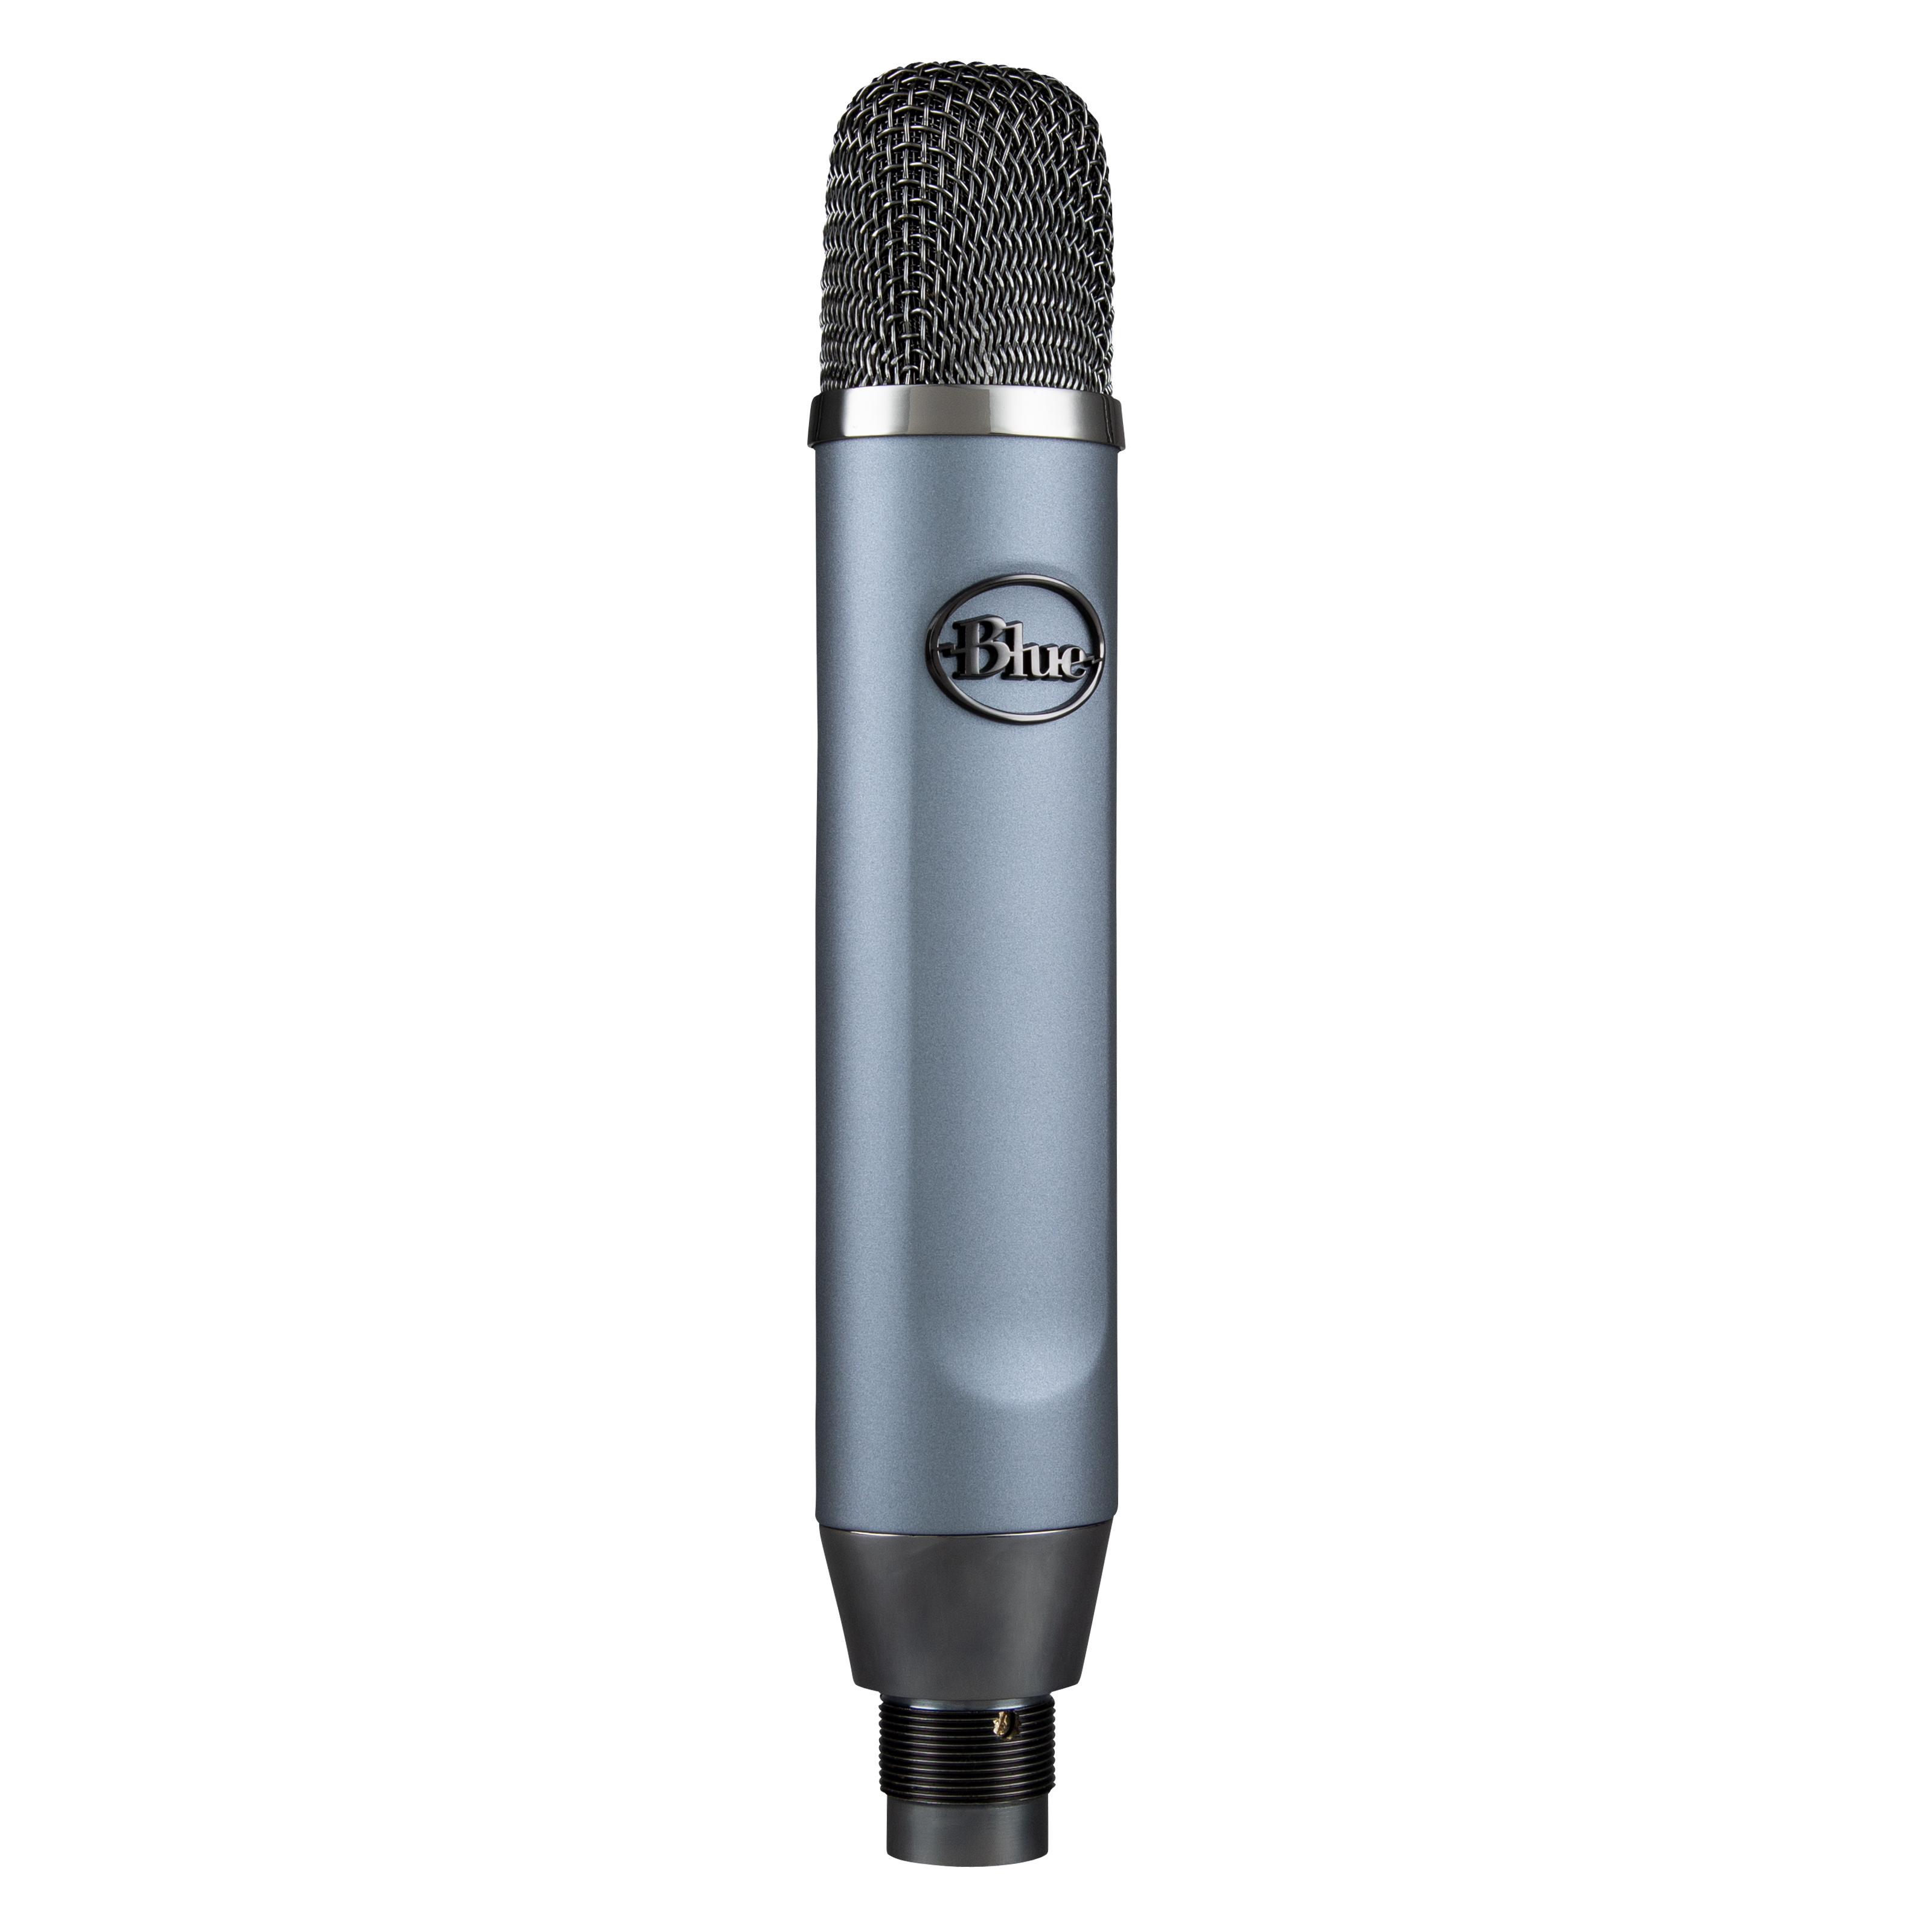 Blue Ember microphone on white background.